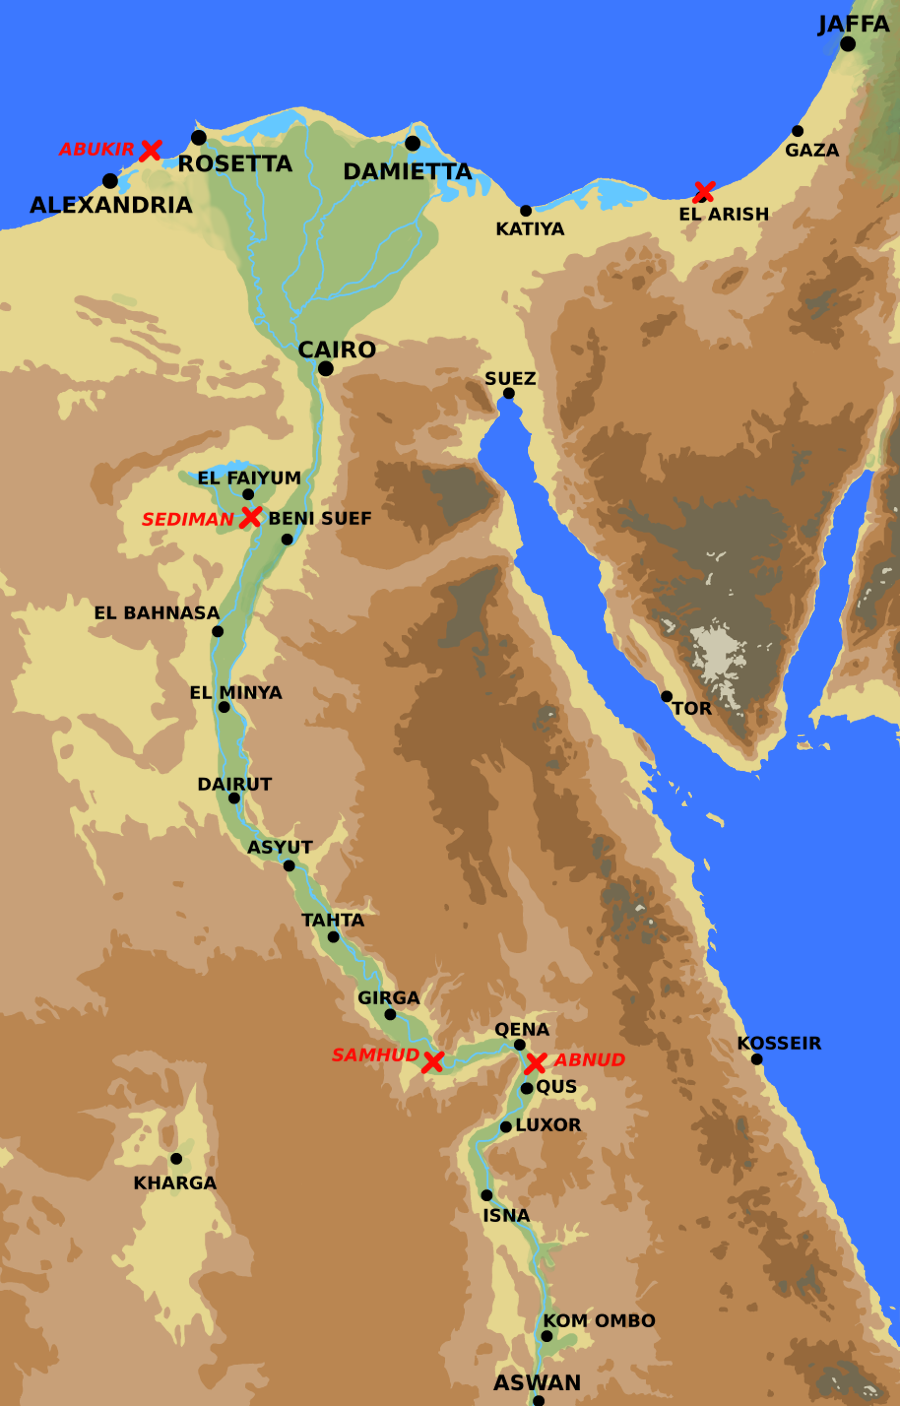 A map showing Egypt up to Aswan.